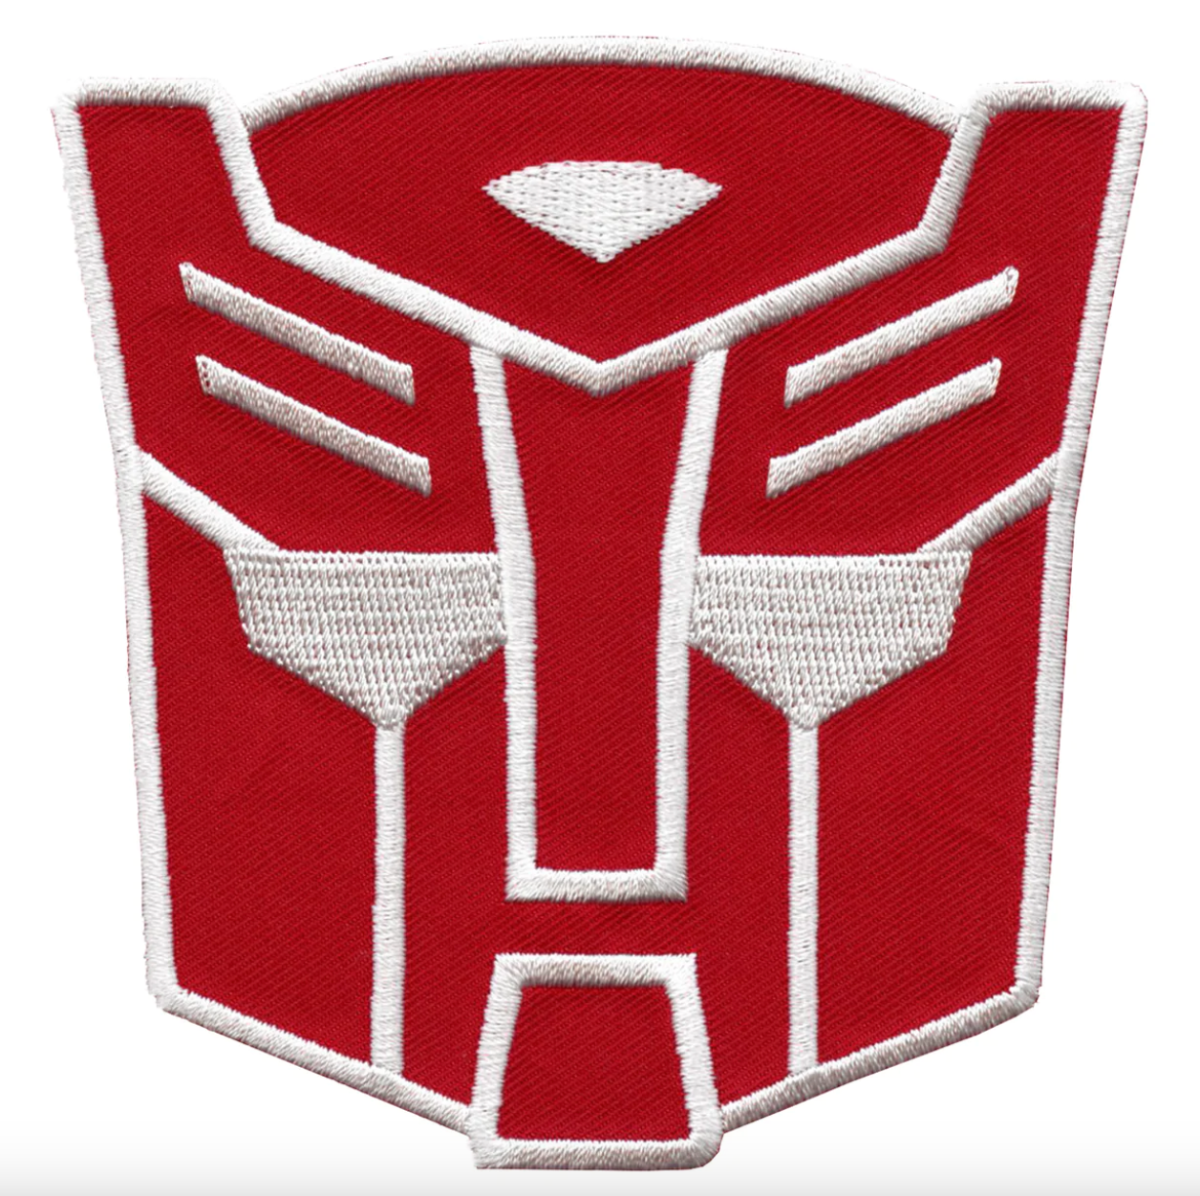 Transformers Autobot Patch